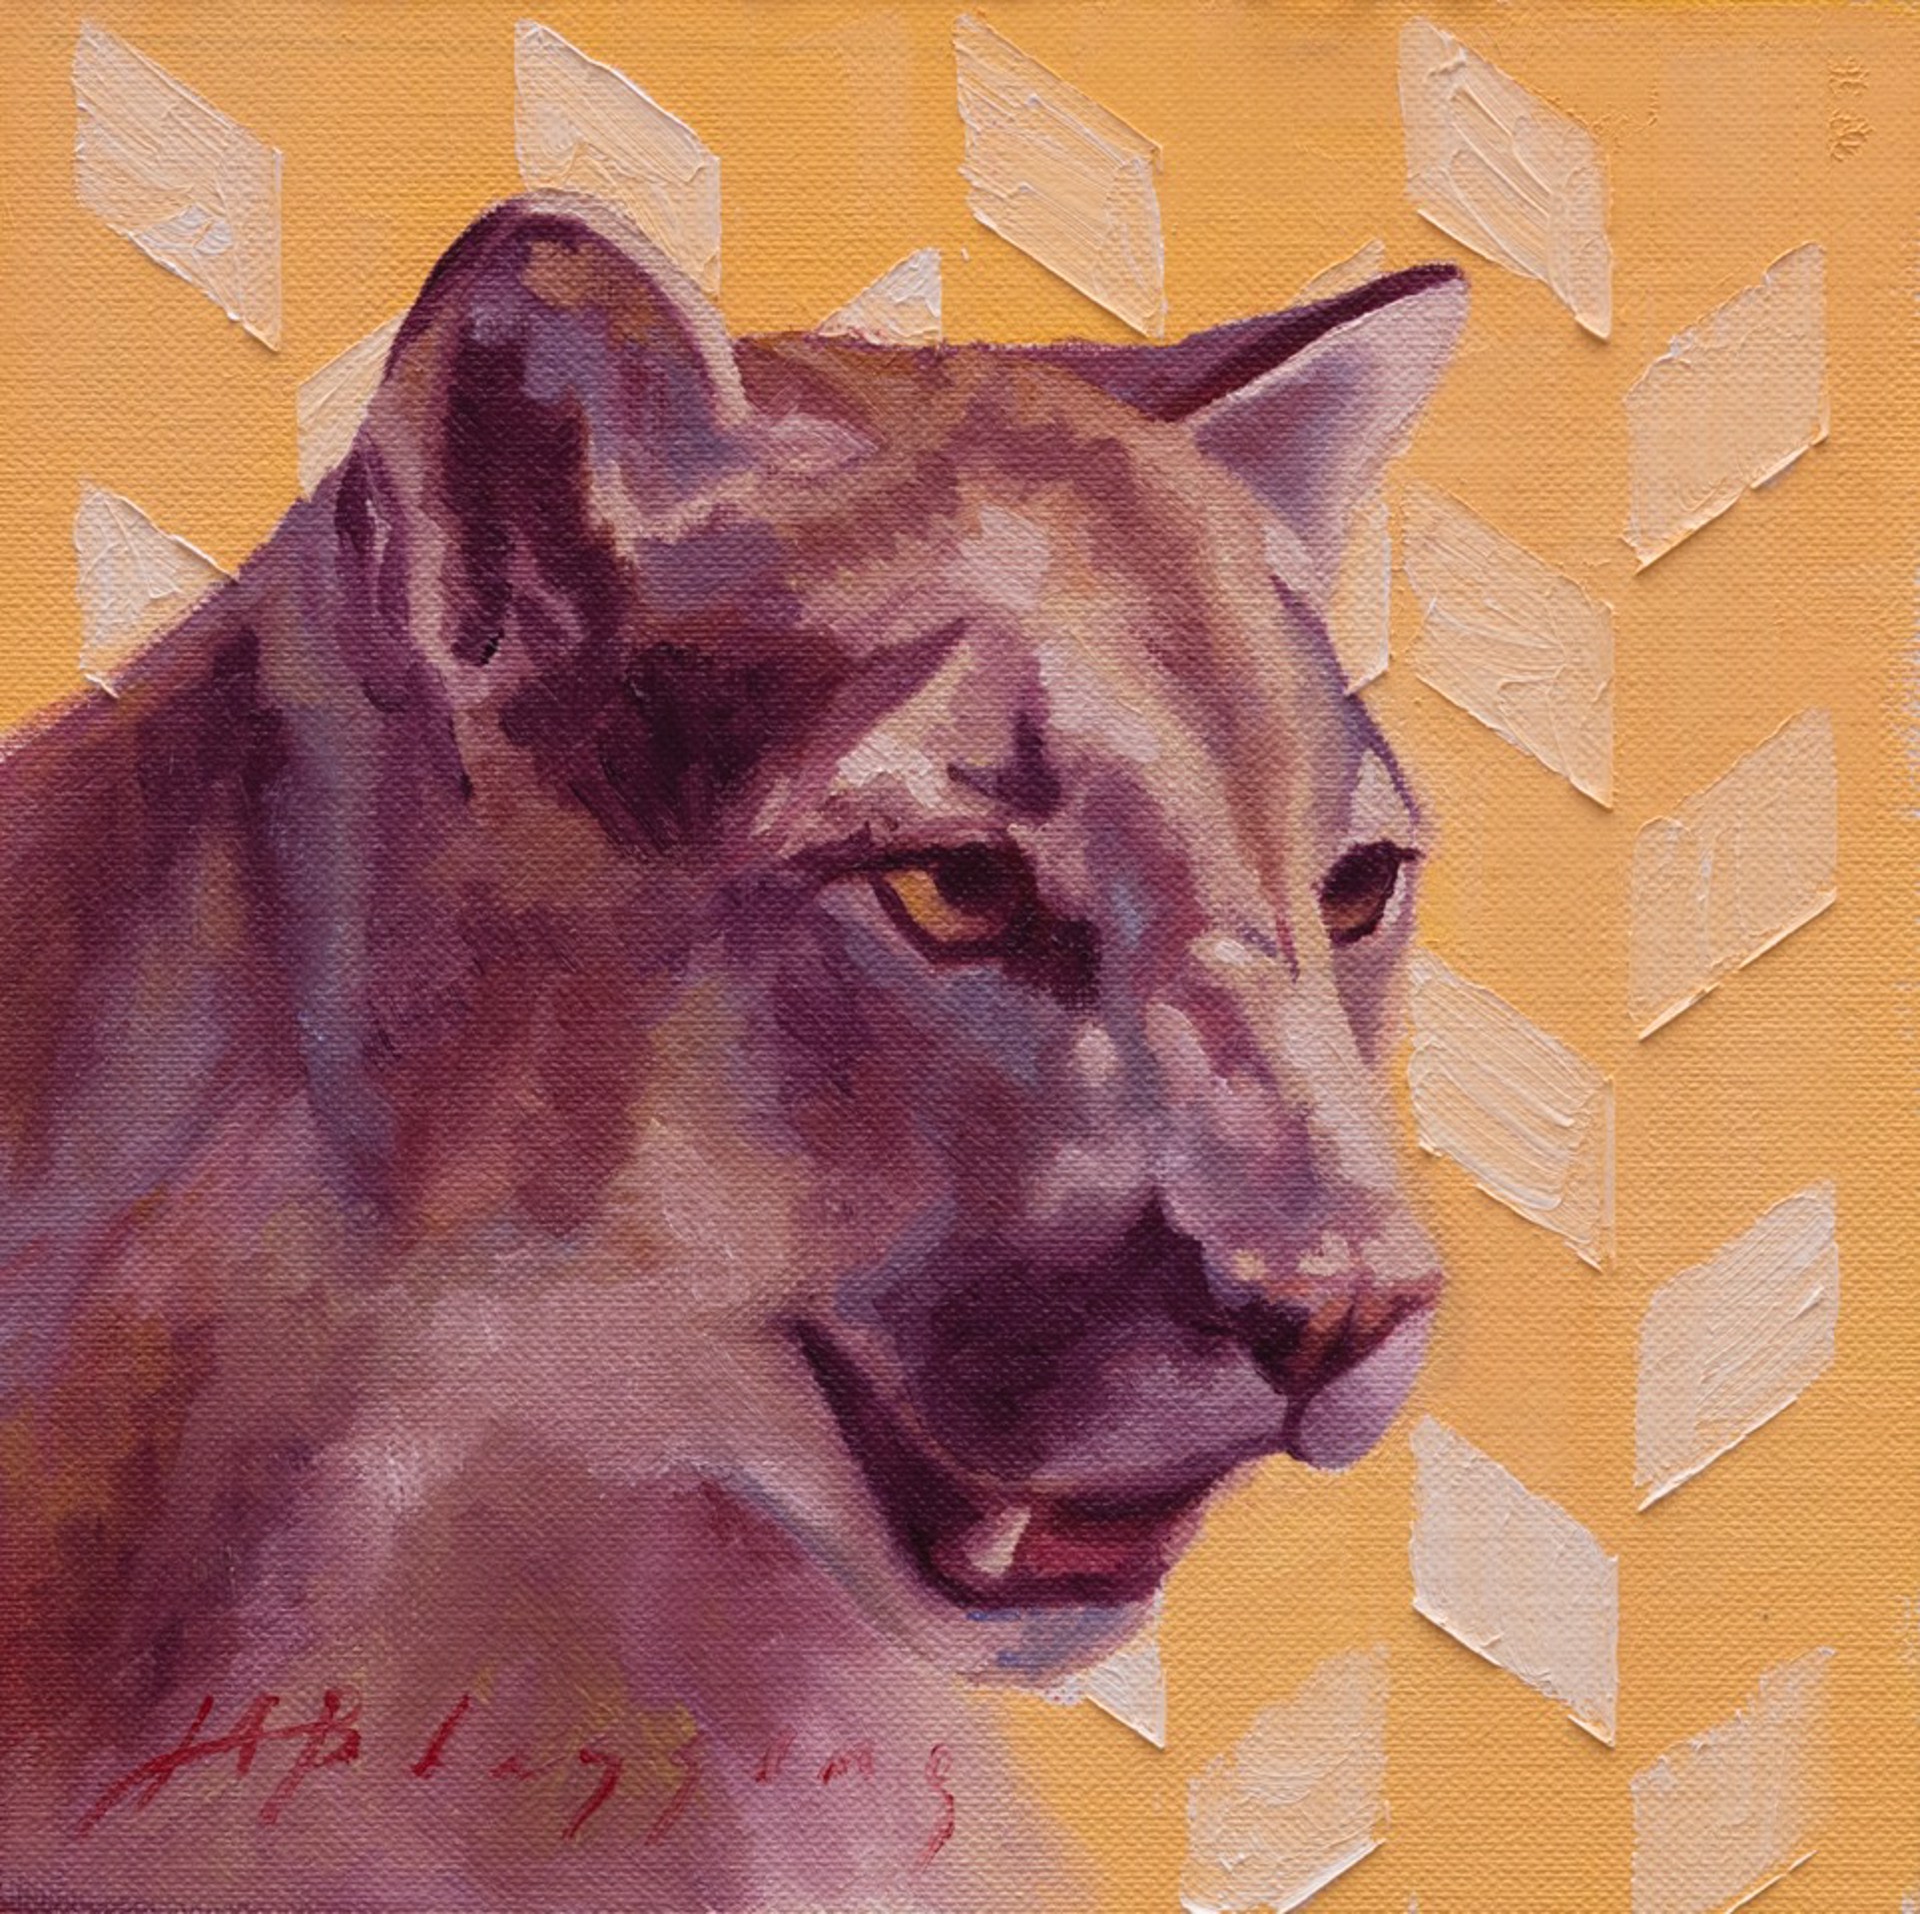 Oil Painting Of A Cougar Face With A Contemporary Modern Yellow And White Patterned Background, Fine Art By Meagan Blessing, Available At Gallery Wild